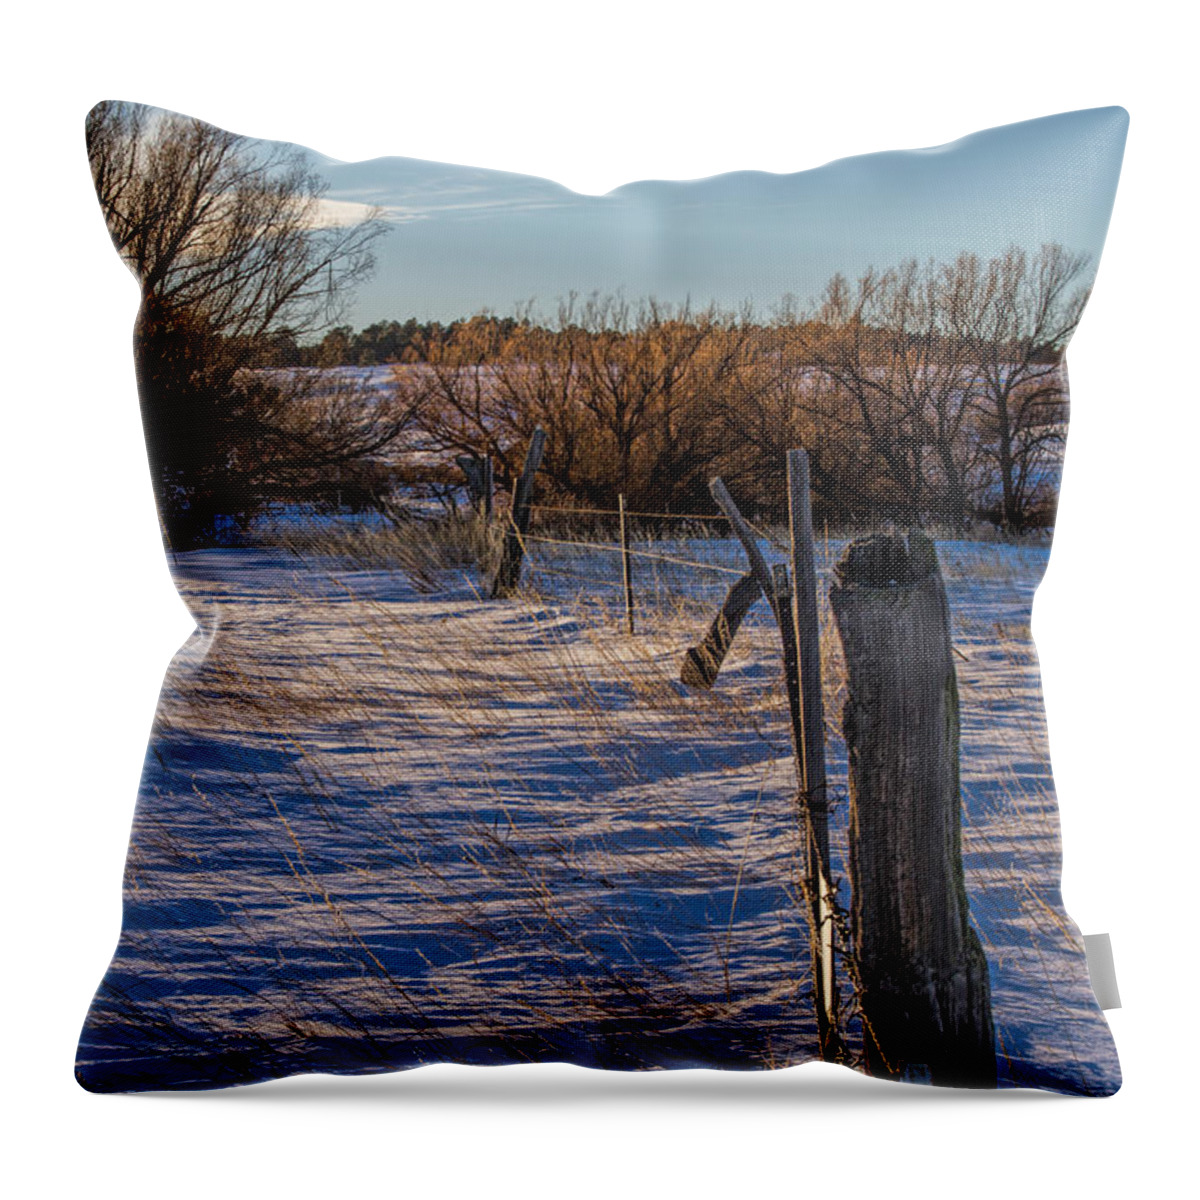 Snow Throw Pillow featuring the photograph Fence Line by Alana Thrower